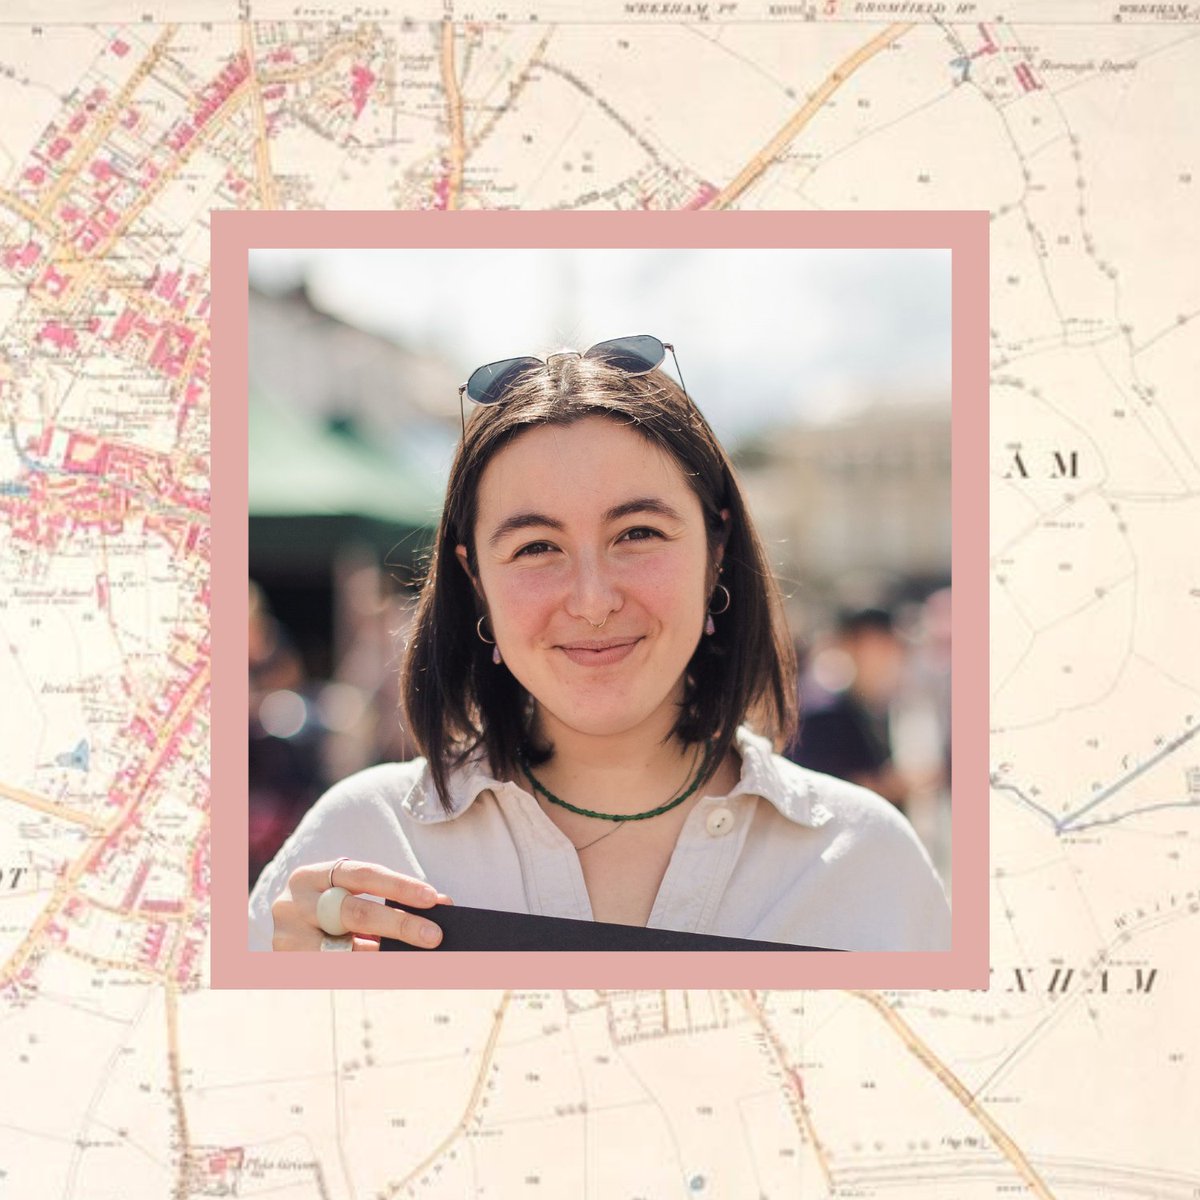 Carto-Cymru - The Wales Map Symposium 2023 📆 12.05.23 🕤 9.30am @GeospatialJess is our third announced speaker for #CartoCymru2023. A Technical Relationship Consultant at @OrdnanceSurvey their talk looks at mapping the milestones in OS's history. 🎫 events.library.wales